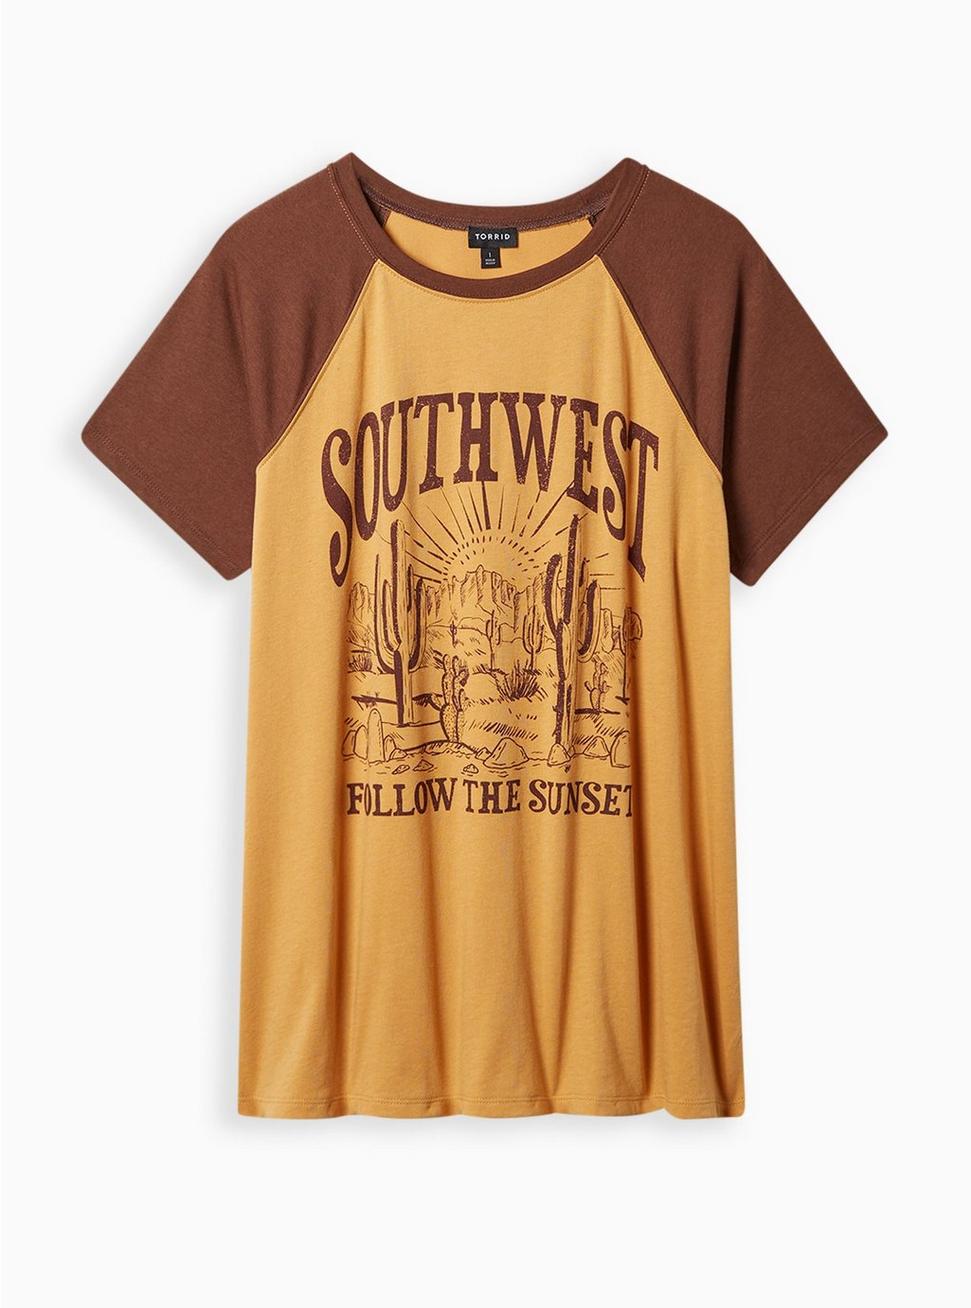 Southwest Classic Fit Polyester Cotton Jersey Crew Tee, BROWN, hi-res